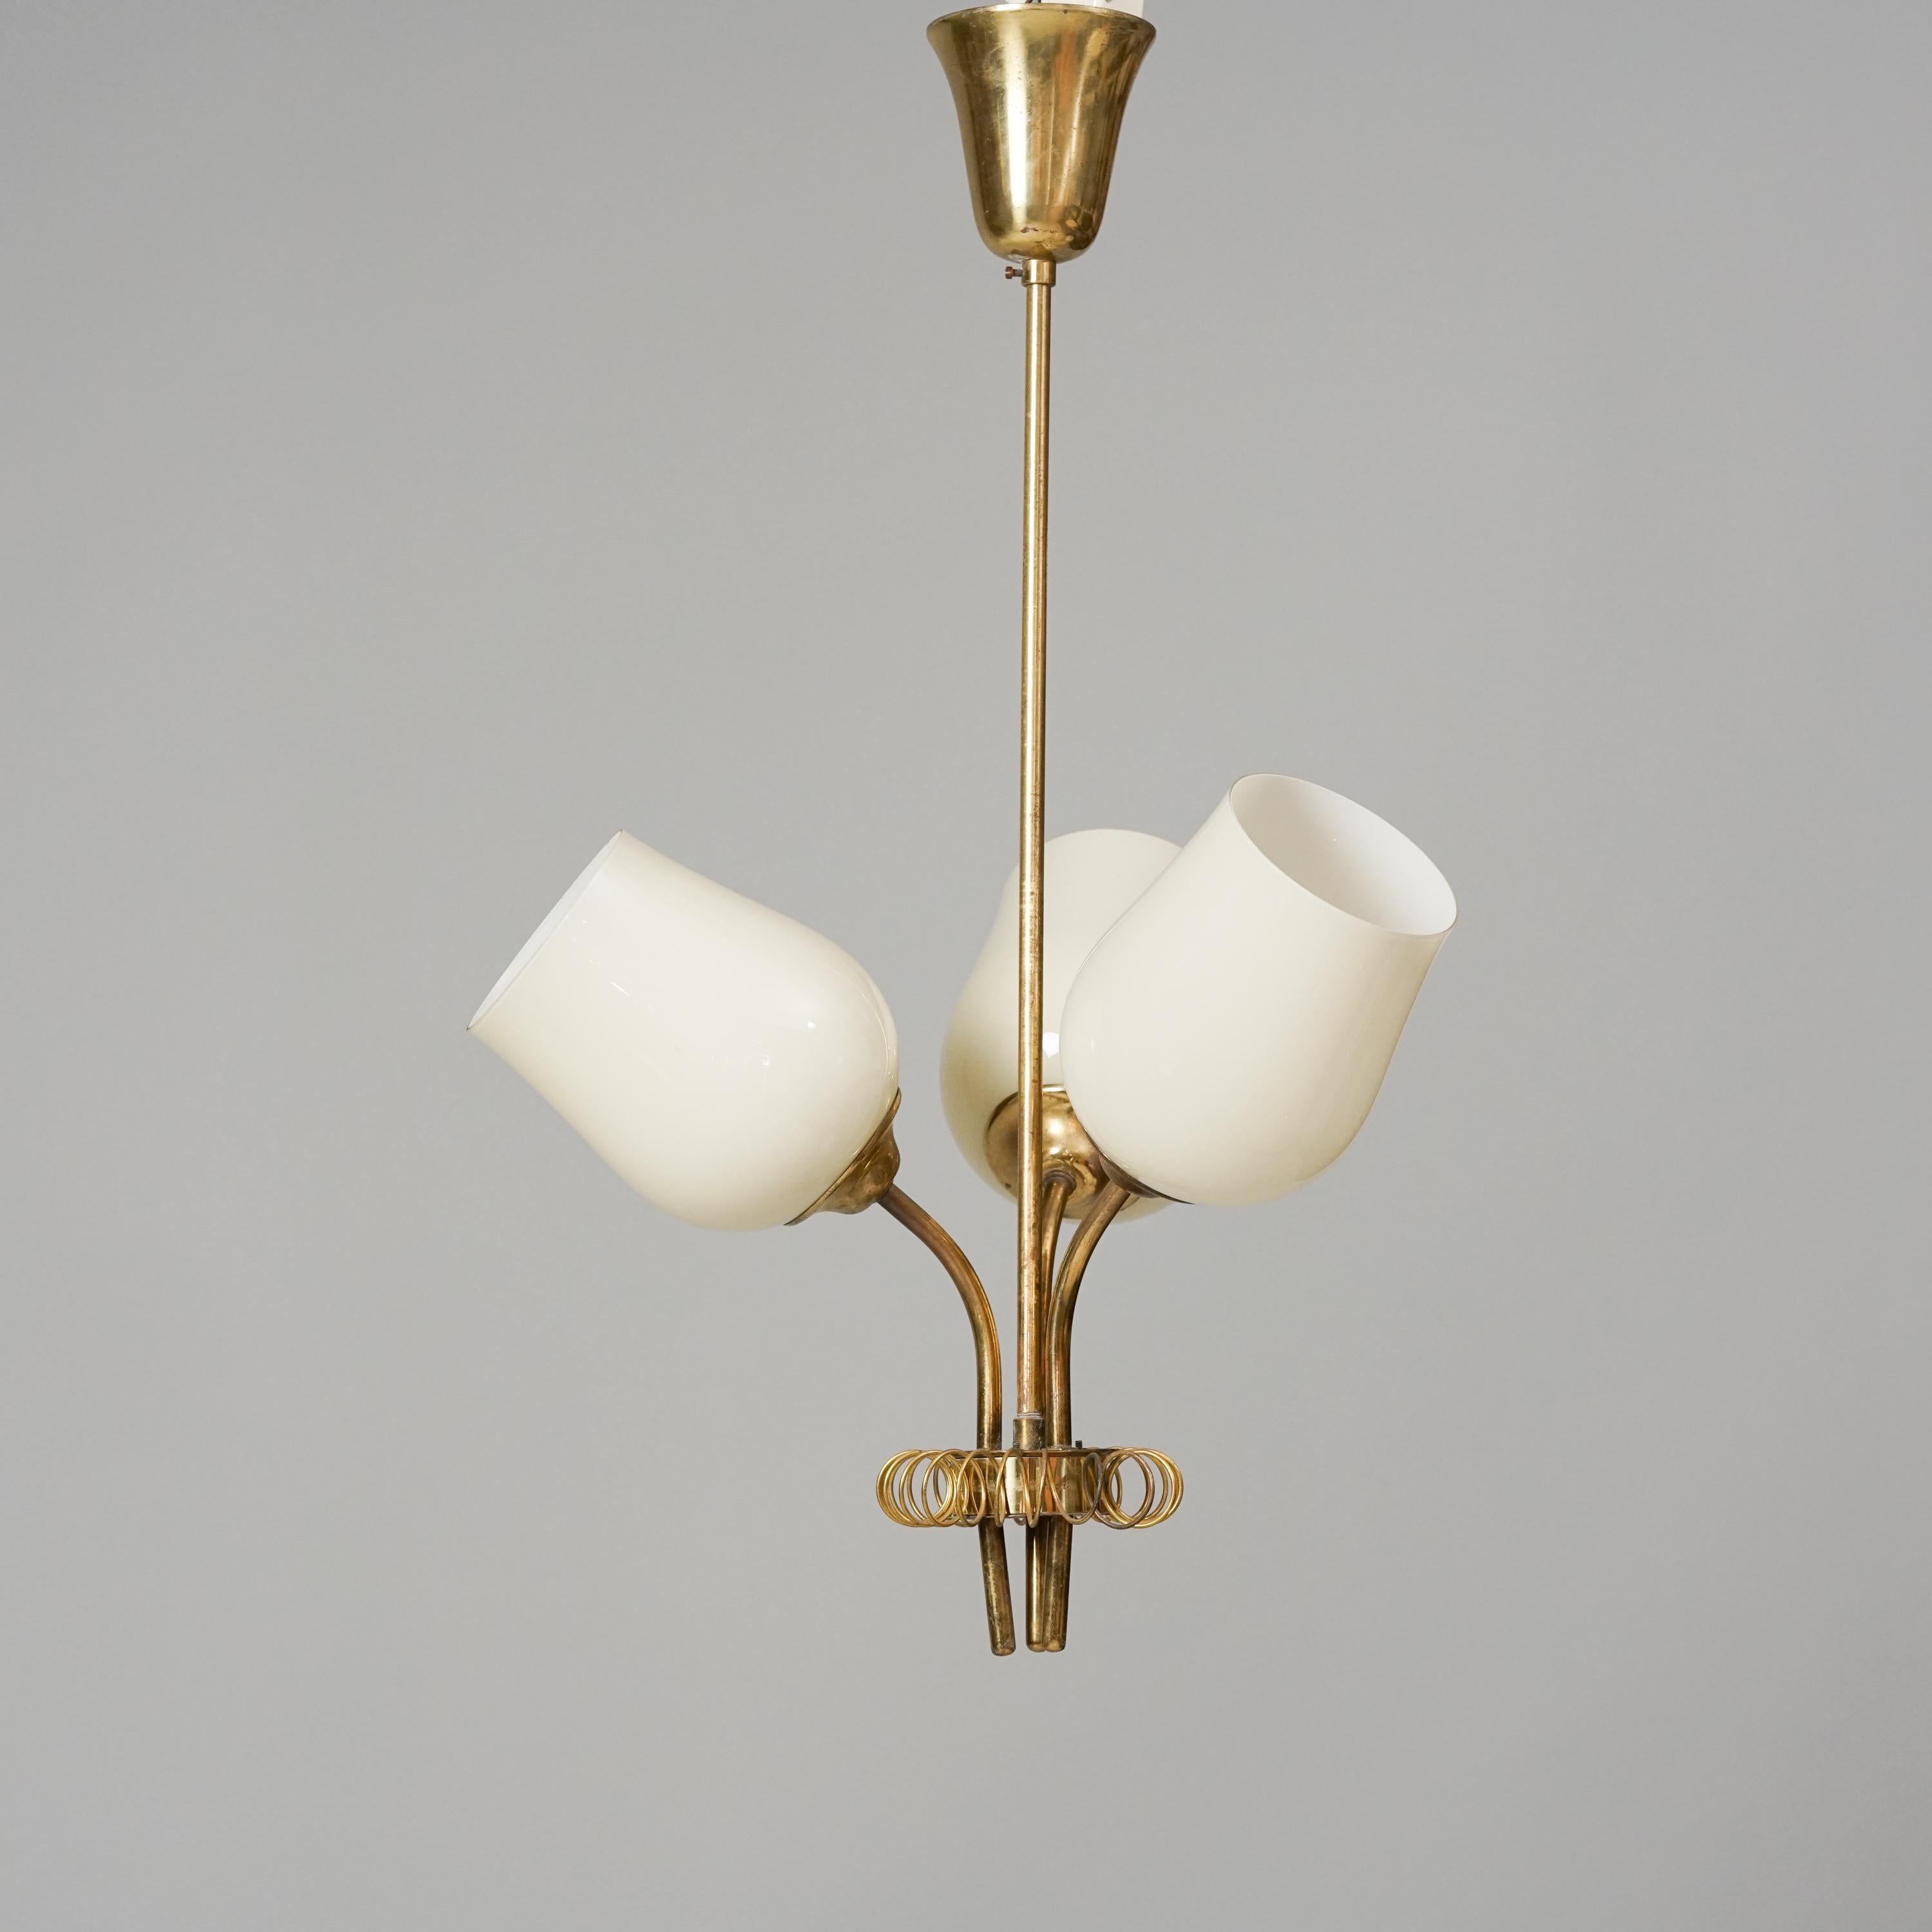 Rare and stunning pair of pendants by Itsu Oy.  Brass and opaline glass, circa 1950s. 

Itsu or Itä-Suomen Sähkö Oy majority of quality Finnish midcentury lights. Most of the models are inspired by Paavo Tynell and Idman/Taito Oy.

!!!The height of